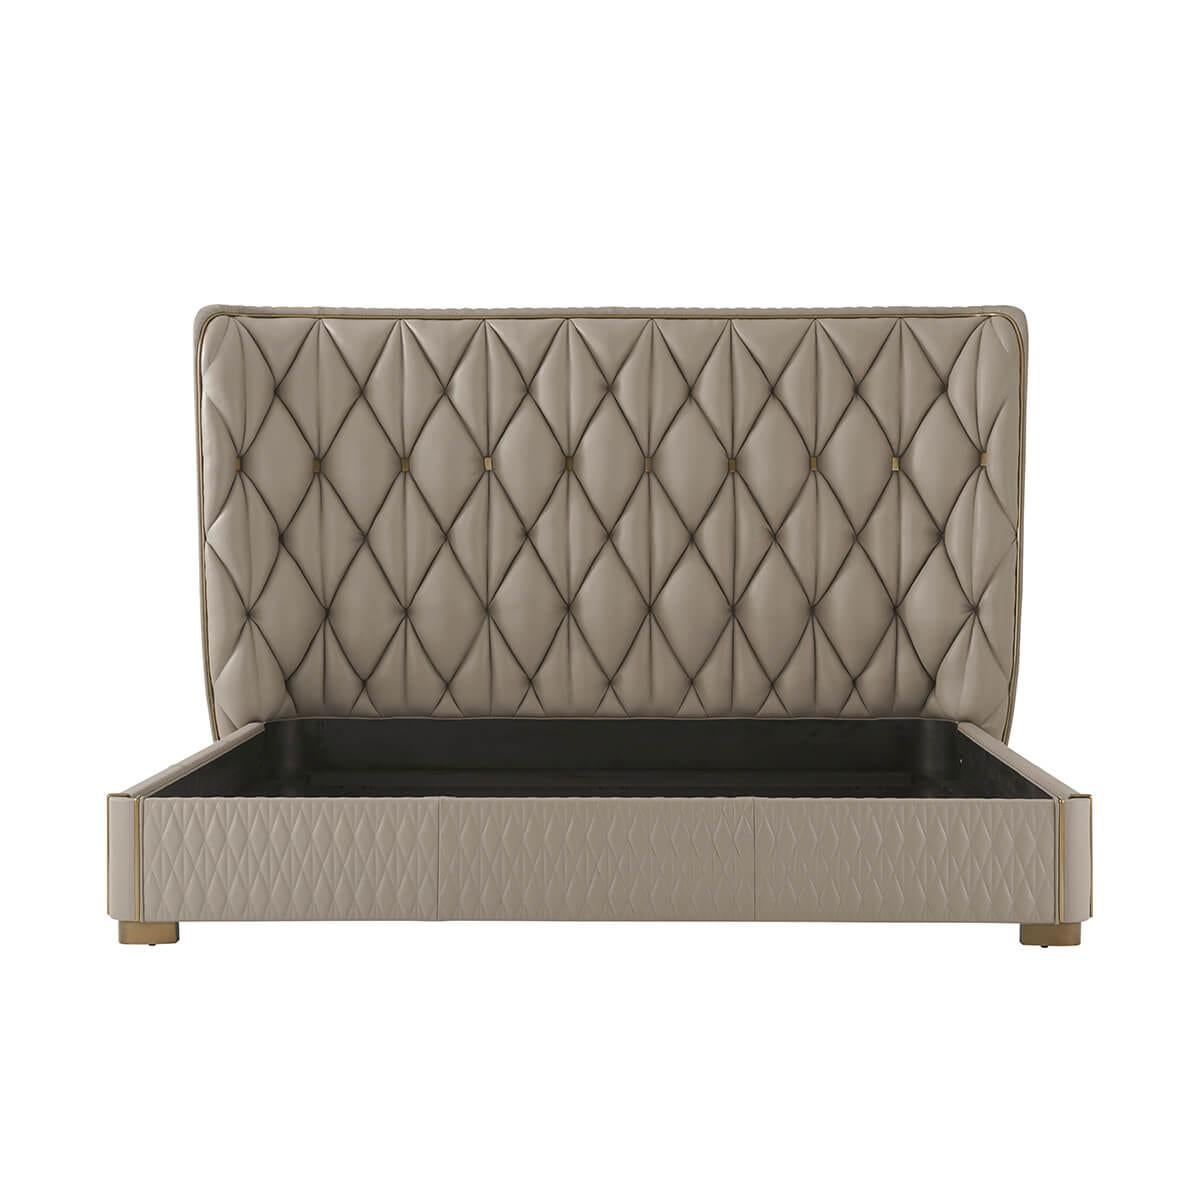 Modern Quilted King Bed with an upholstered curved headboard. With geometric quilting and tufting and brass button details.

With a bronze finish molding surround and quilted rails raised on recessed feet. Shown in Almond-LE0401A Leather and